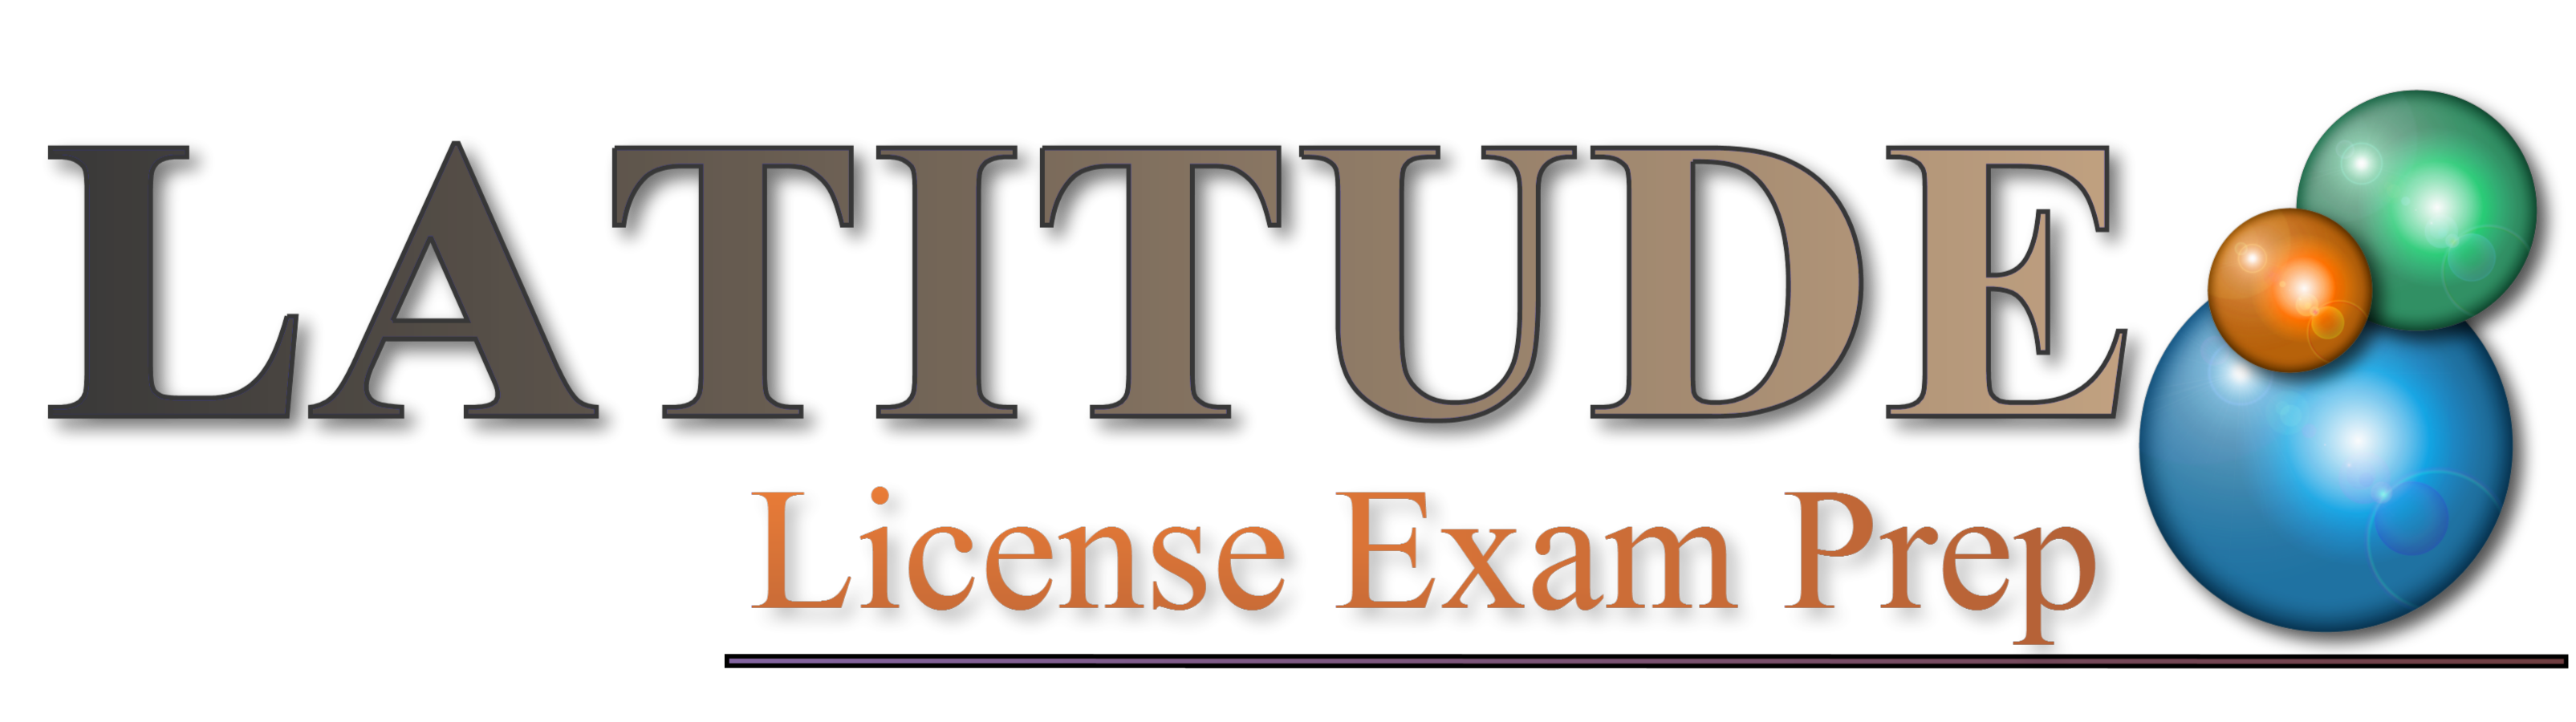 Terms of Use for Insurance License Exam Test Prep